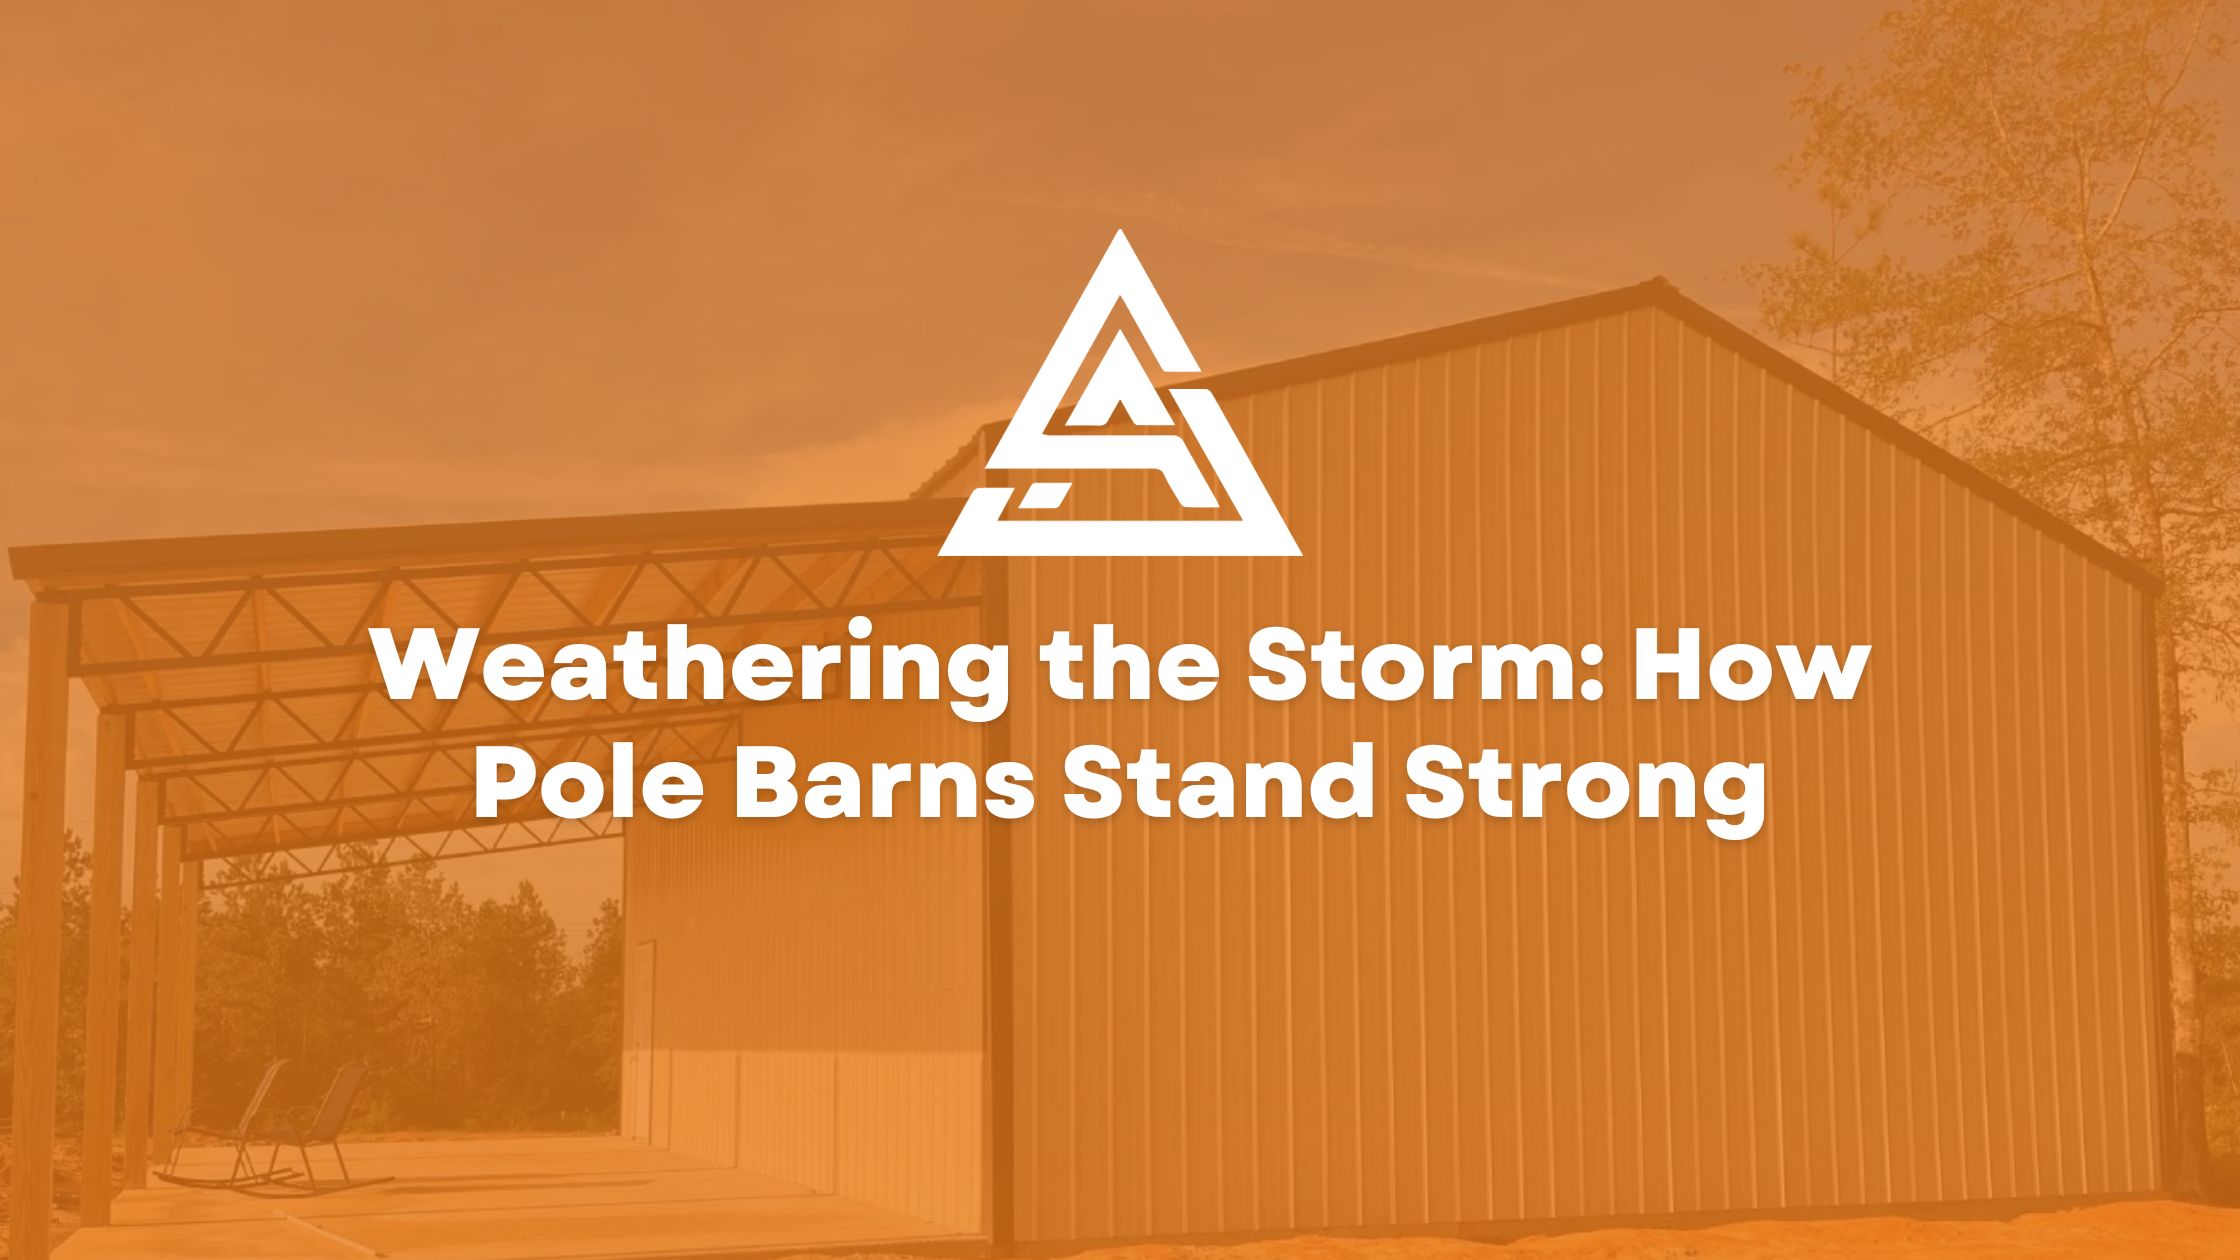 Weathering the Storm: How Pole Barns Stand Strong